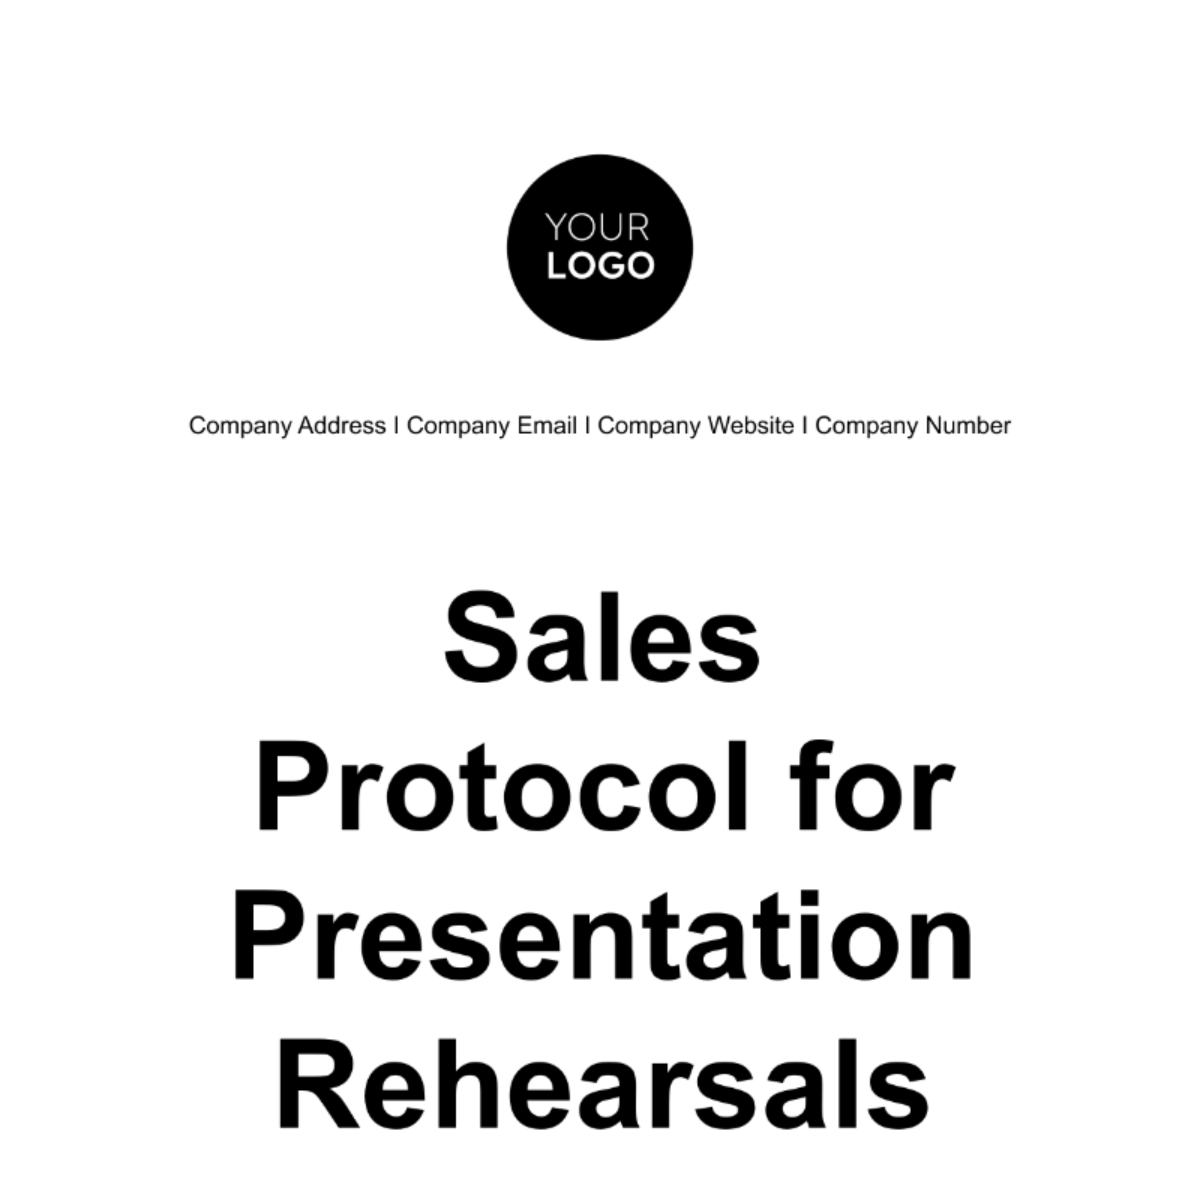 Sales Protocol for Presentation Rehearsals Template